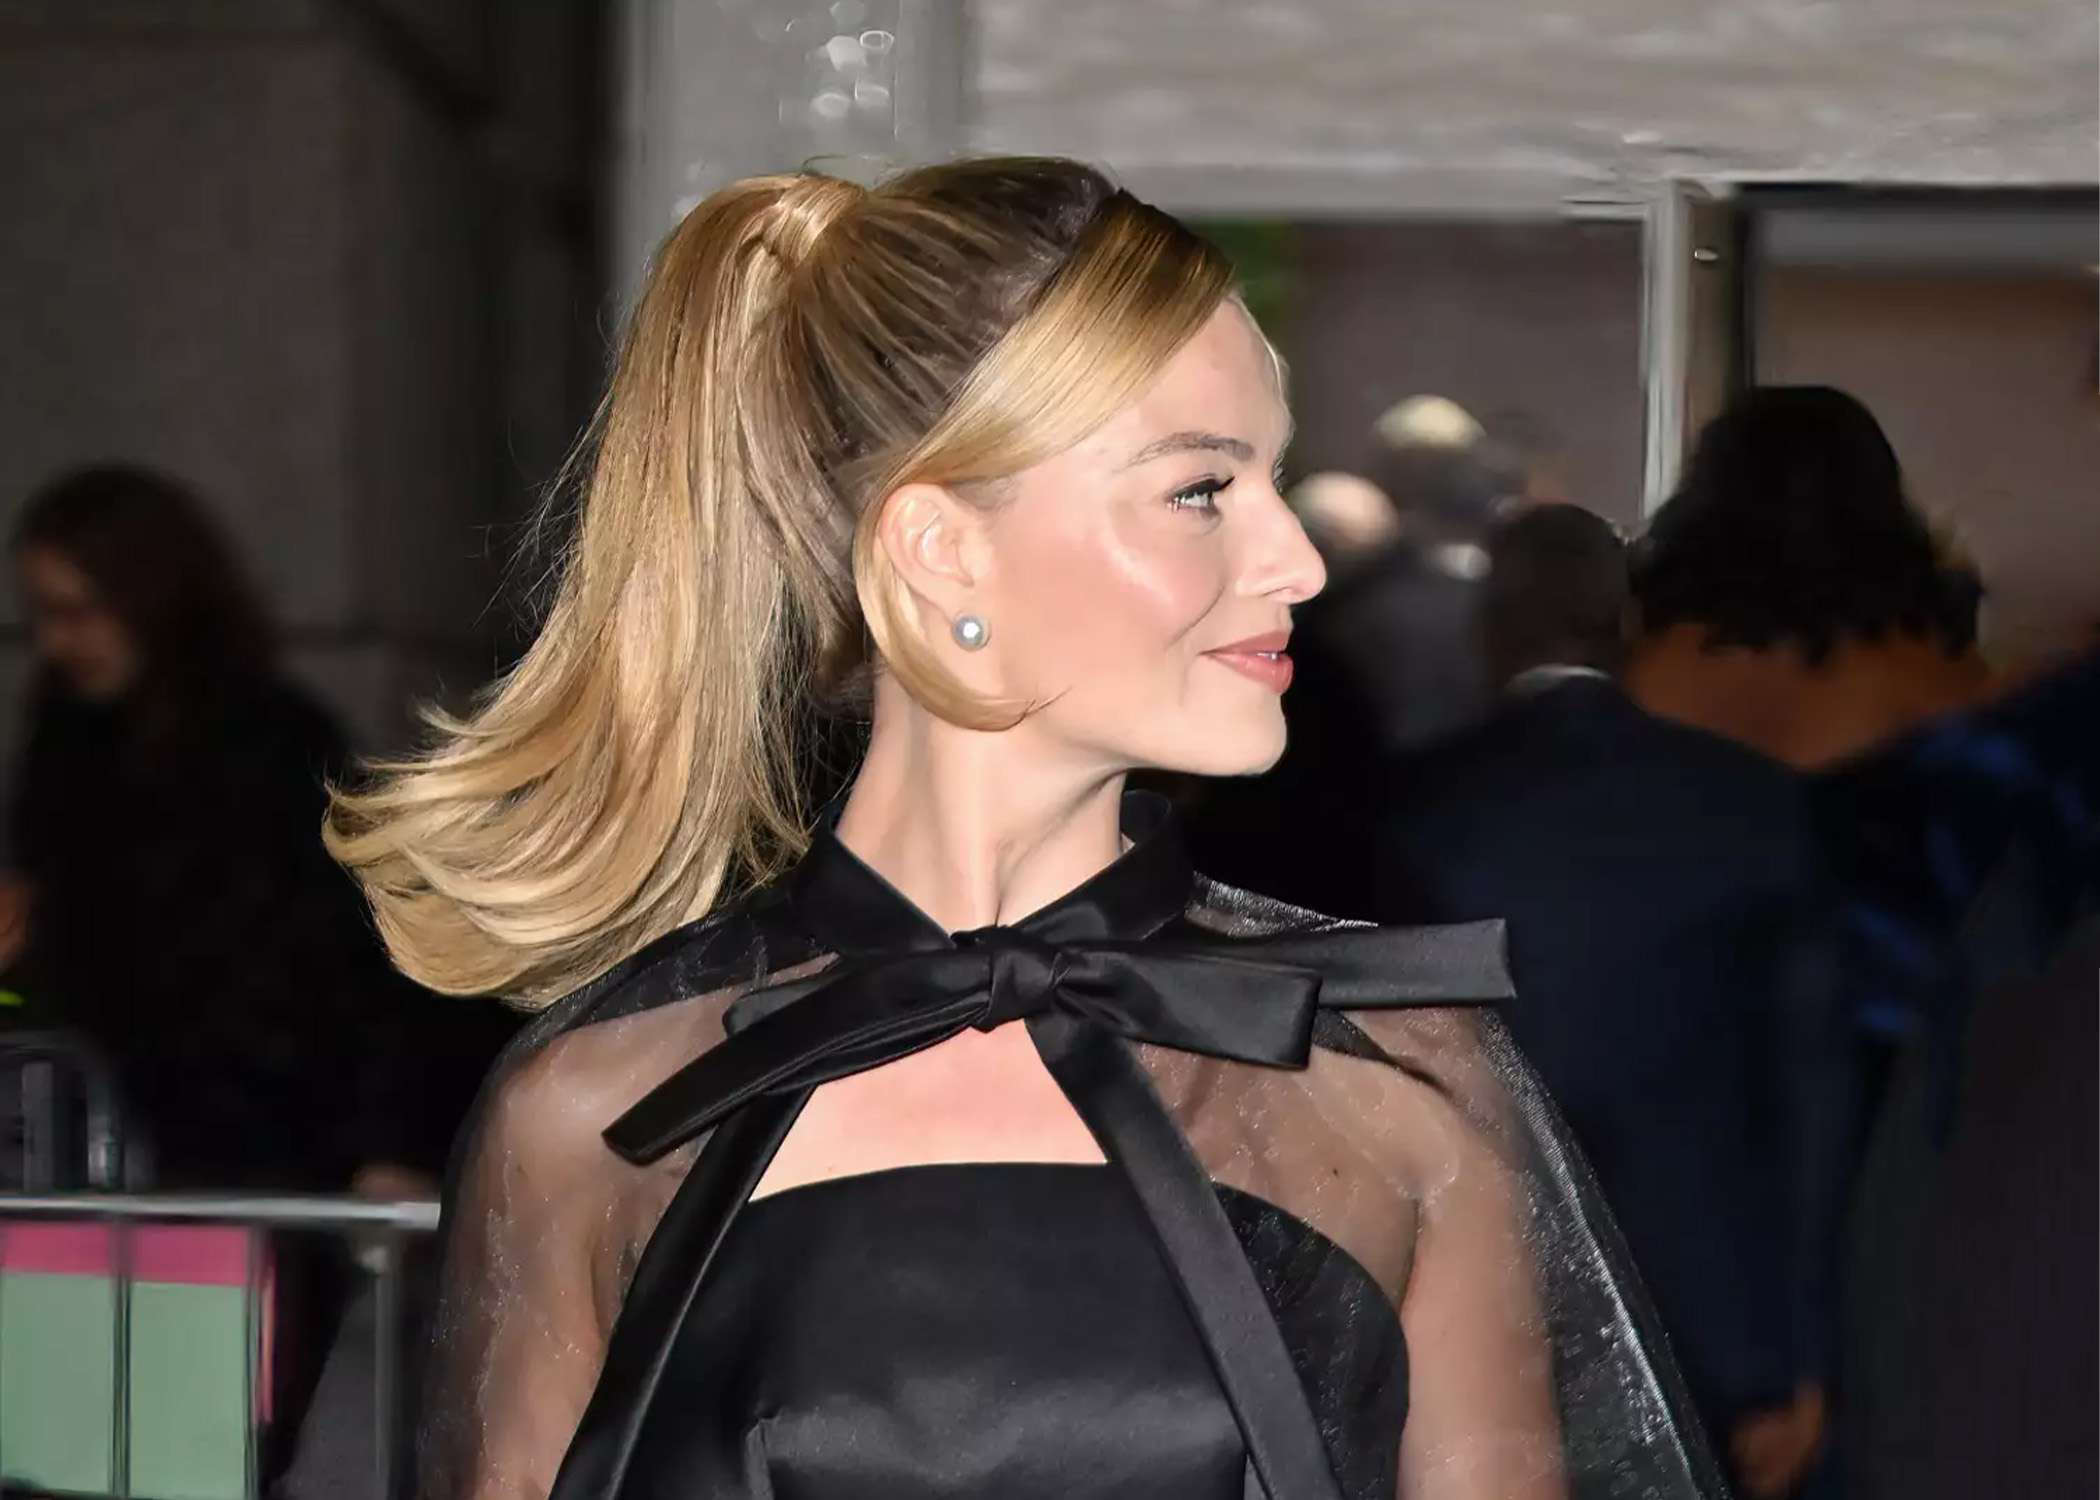 18 Ponytail Hairstyles From Sleek and Simple to Bold and Intricate